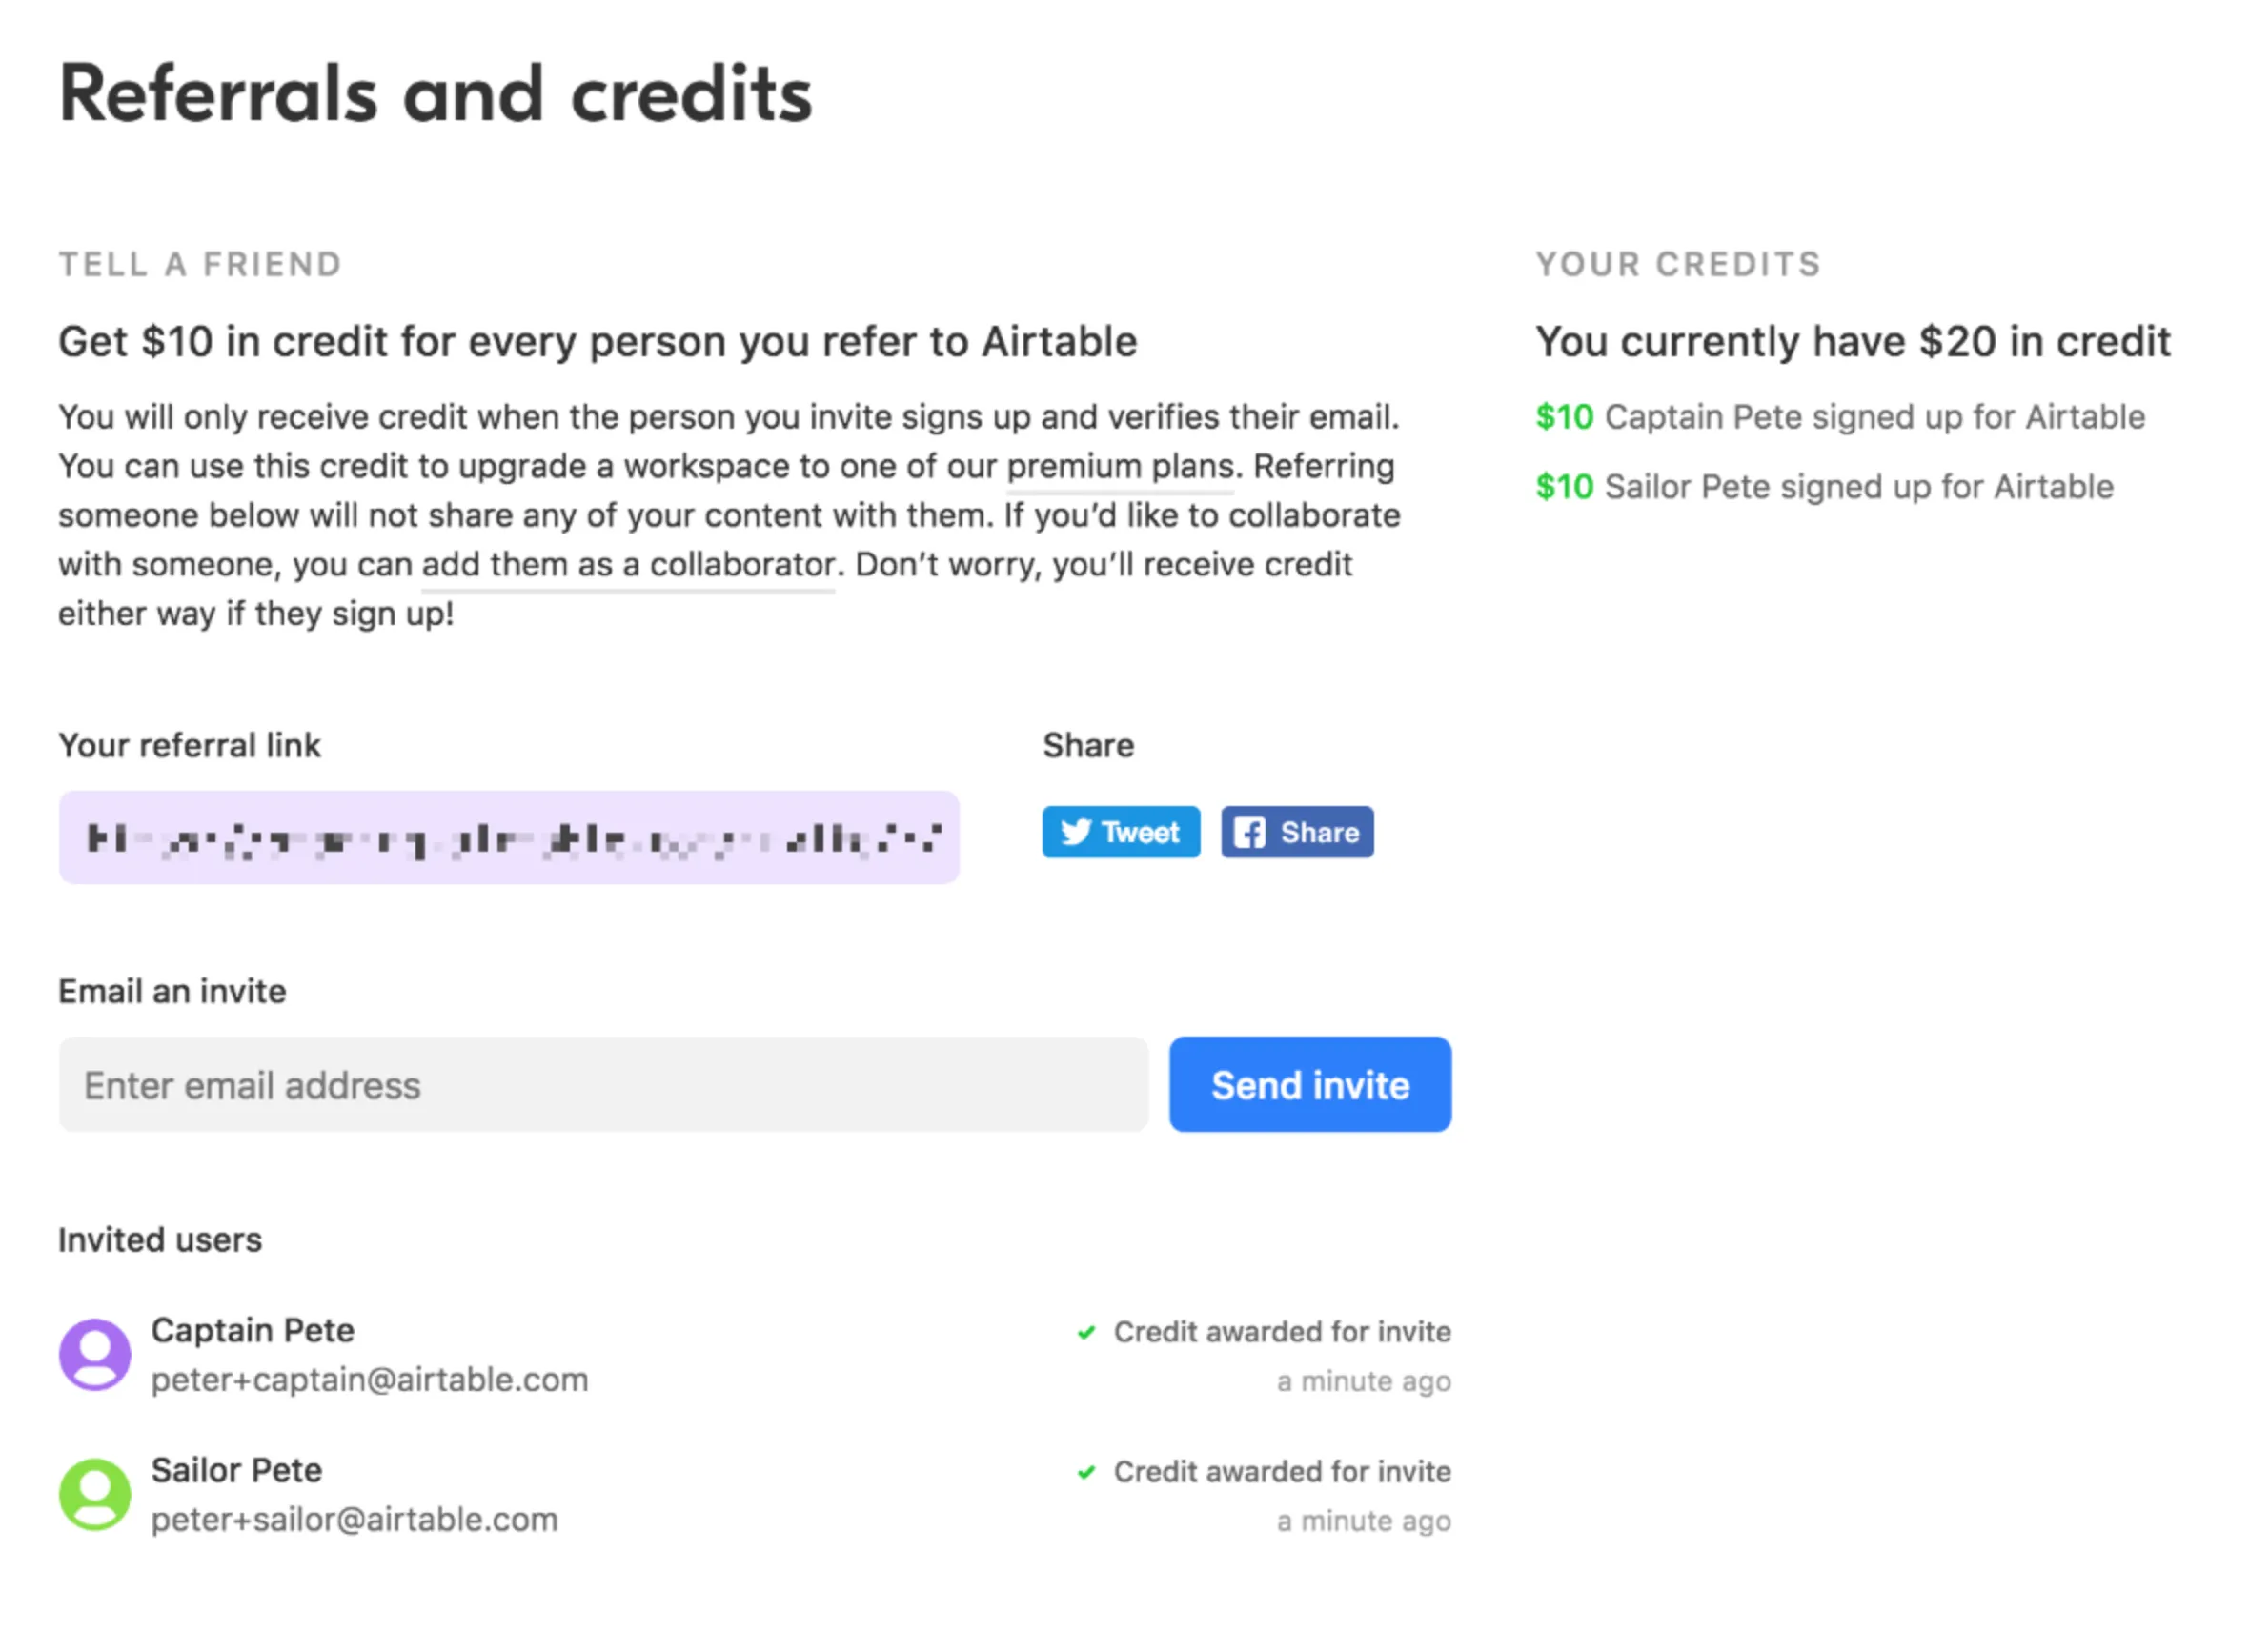 This is a screenshot of Airtable's referral landing page. The page has minimal visuals and mostly contains text. On the left side, there is a small paragraph explaining how users can earn $10 in credit for every person they refer to Airtable. There is also a section with a referral link and social media icons for Twitter and Facebook, which users can use to share the link with friends. Below this section, there is a form to send email invites, and below that, users can see the list of invited users. On the right side, users can see how many credits they have earned.